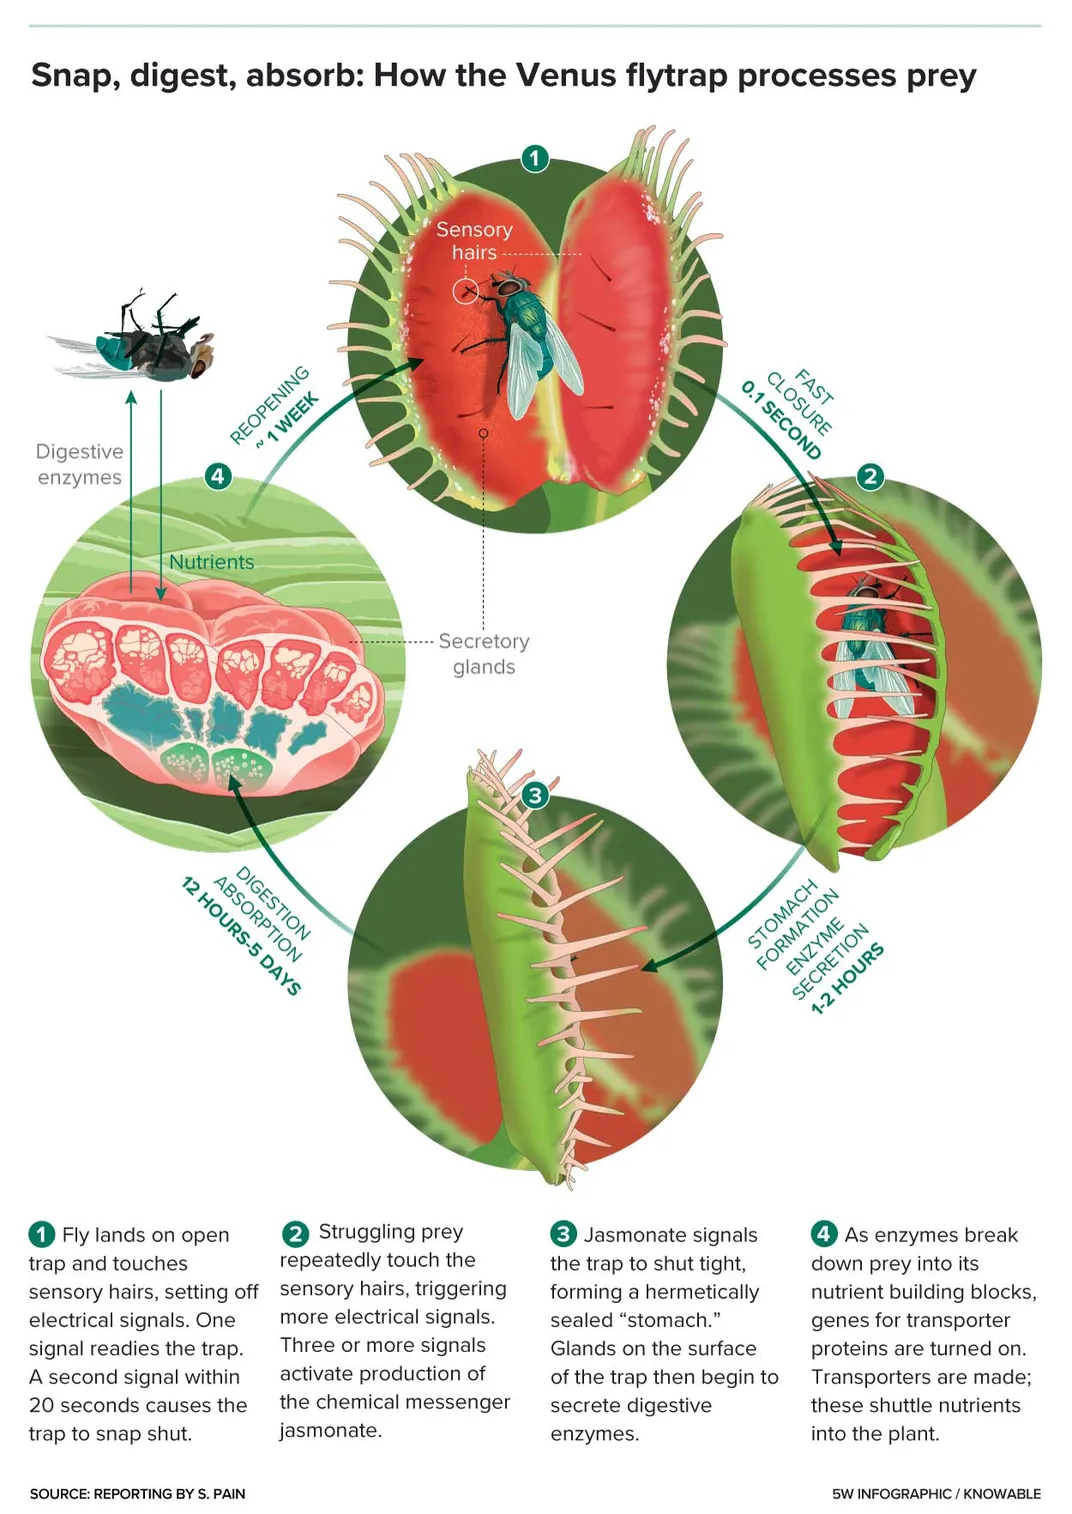 Venus Flytrap Graphic From Knowable